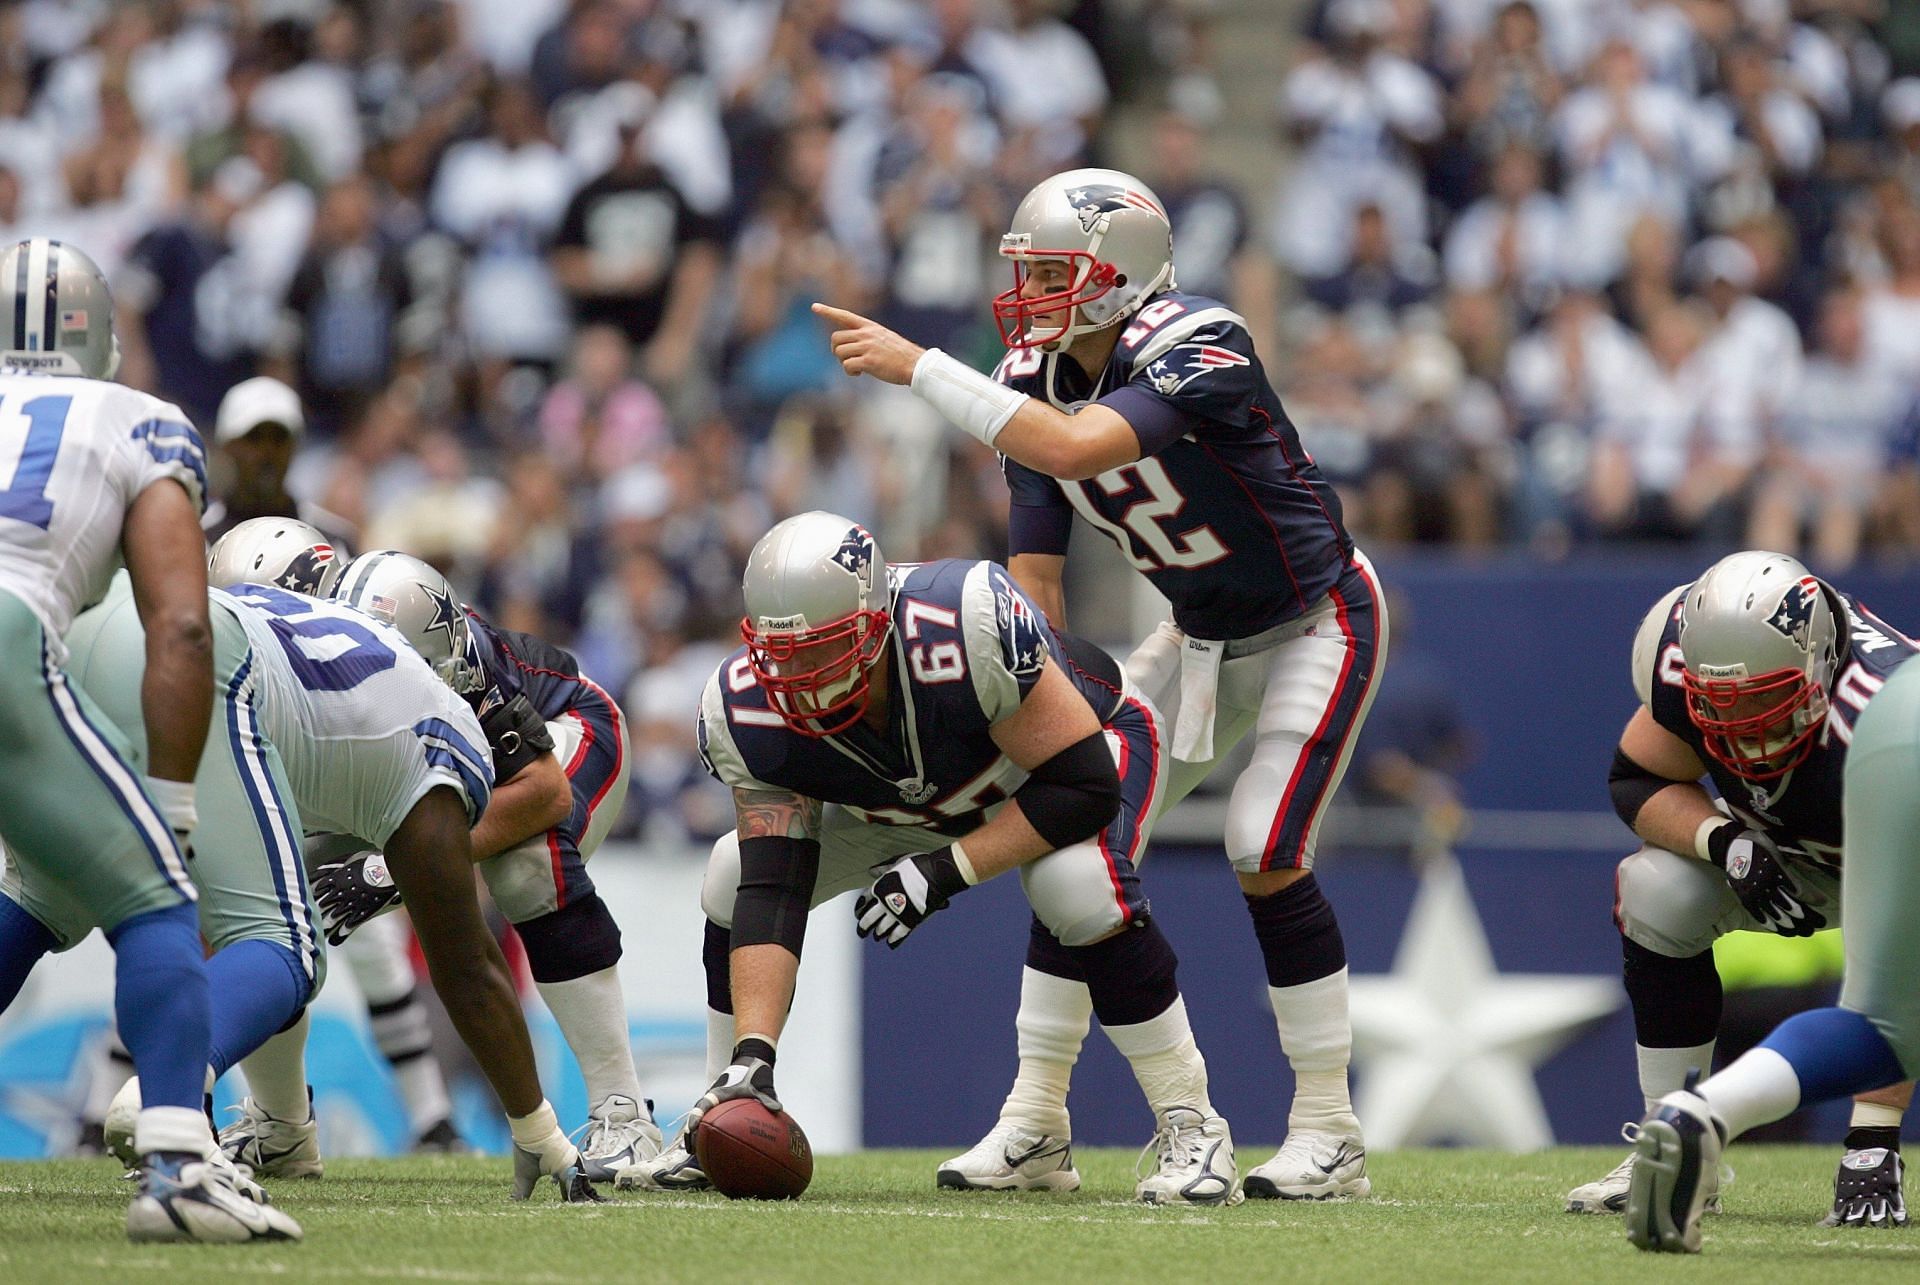 Brady and the Patriots took care of business in a three-touchdown win over Dallas (Photo: Getty)